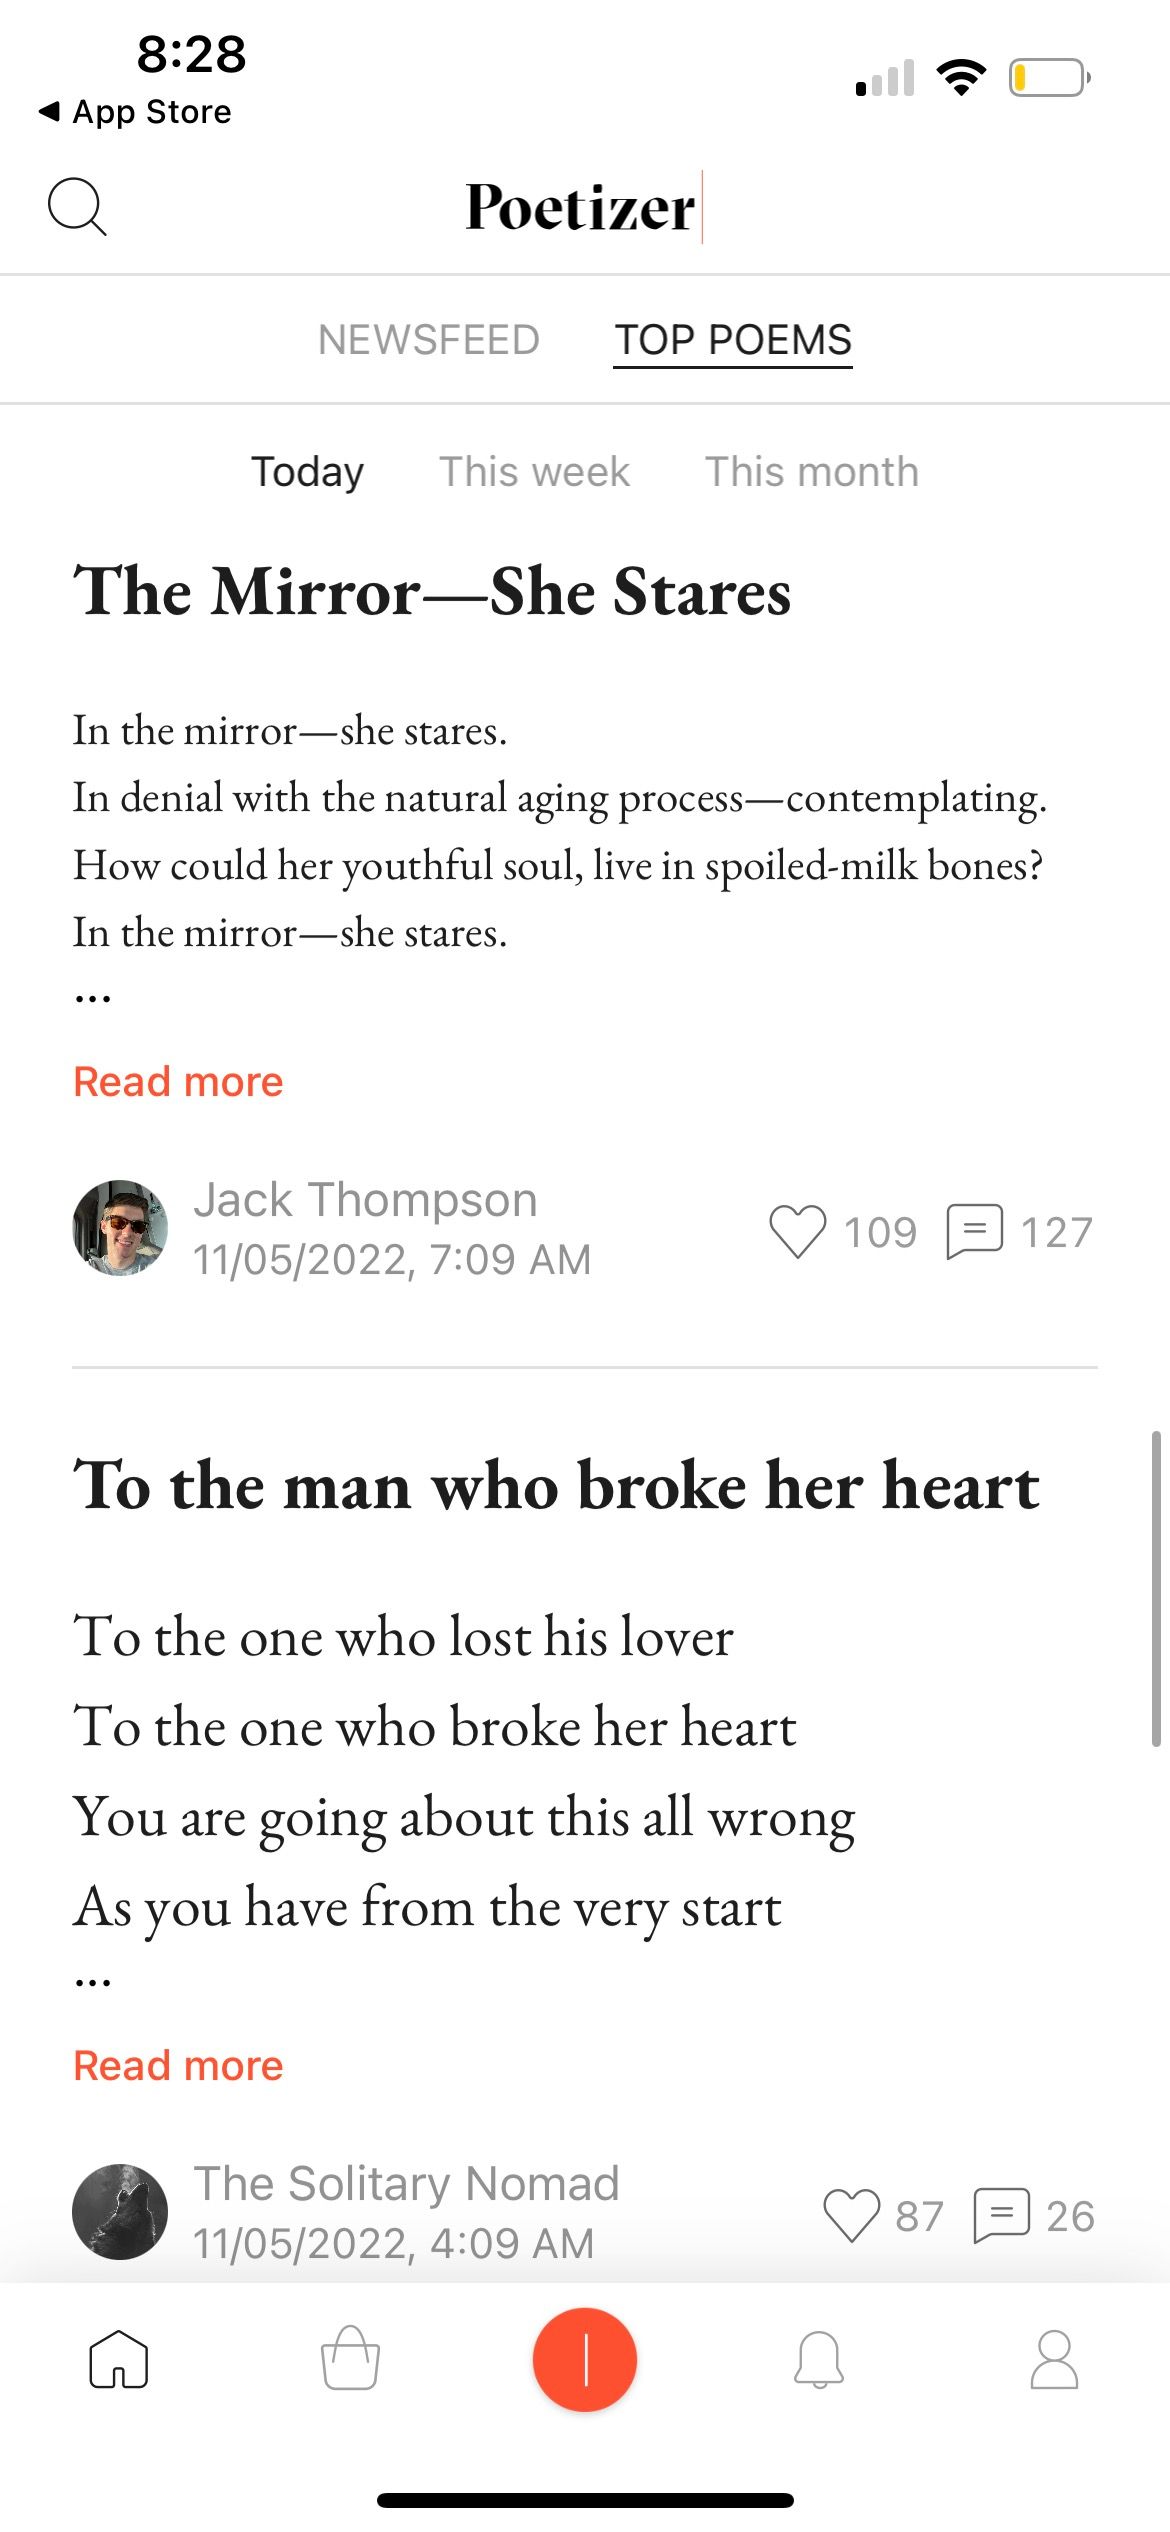 top daily poems on poetizer app